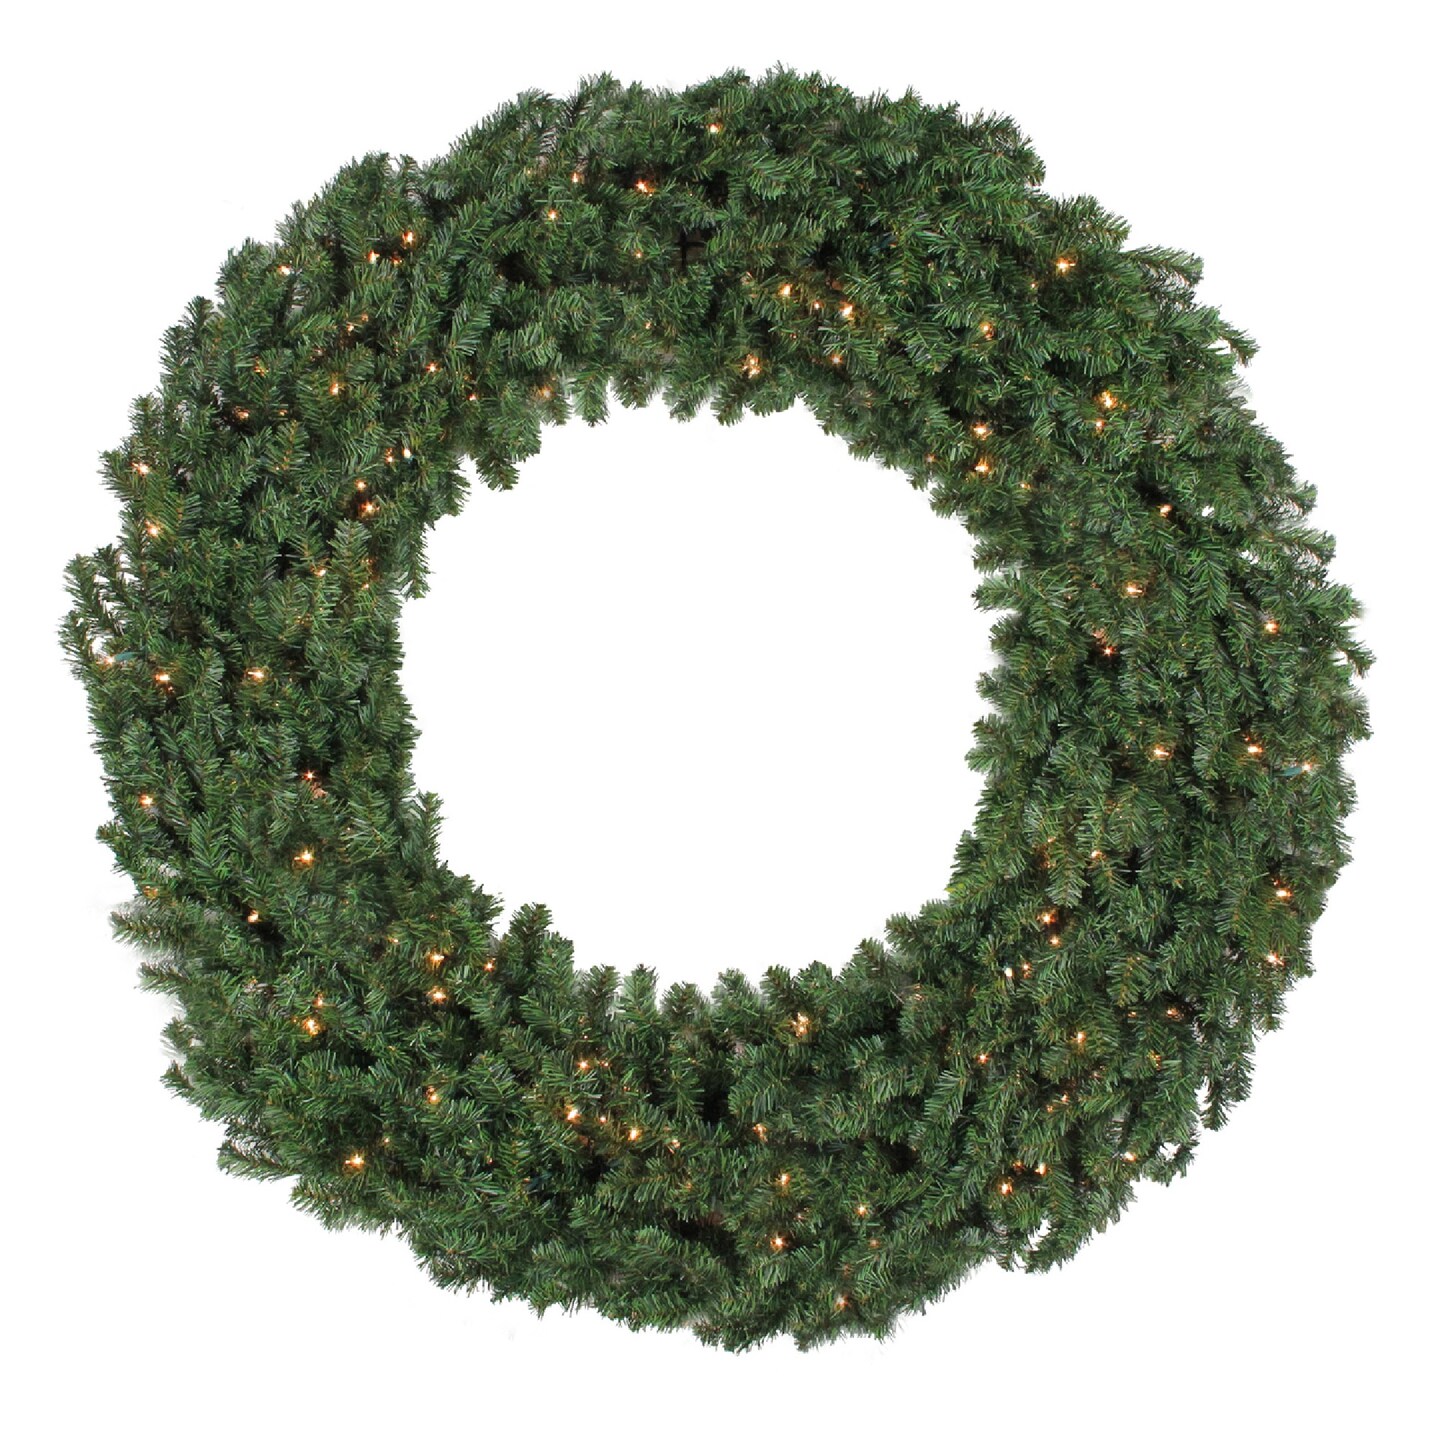 Northlight Pre-Lit Canadian Pine Commercial Size Christmas Wreath - 12ft, Clear Lights